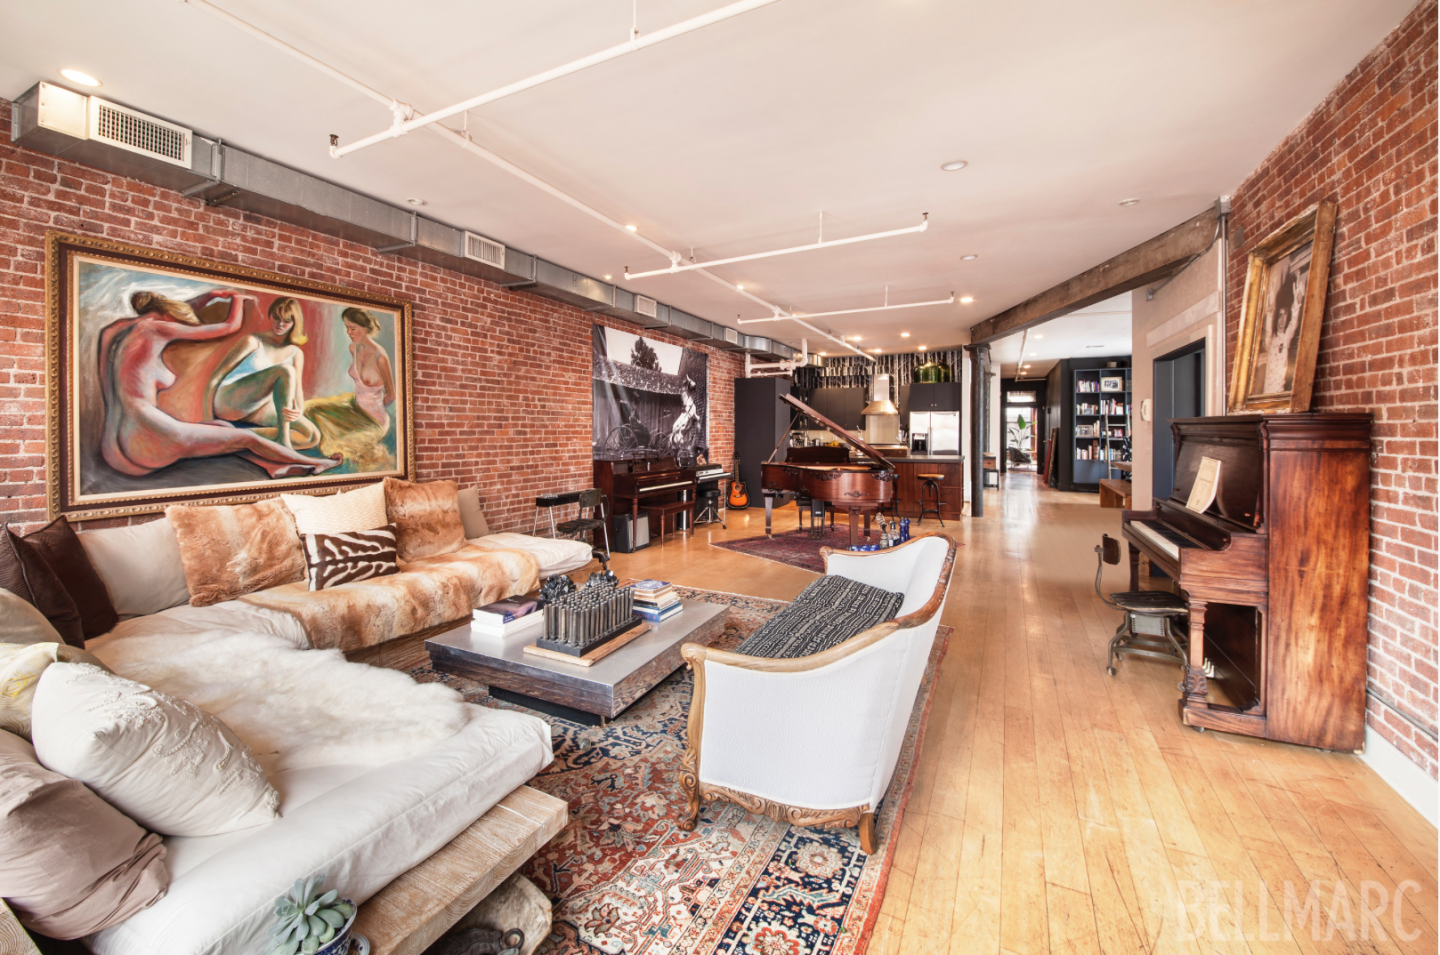 Carlton's rentable 2,500-square foot loft includes use of her two pianos. 